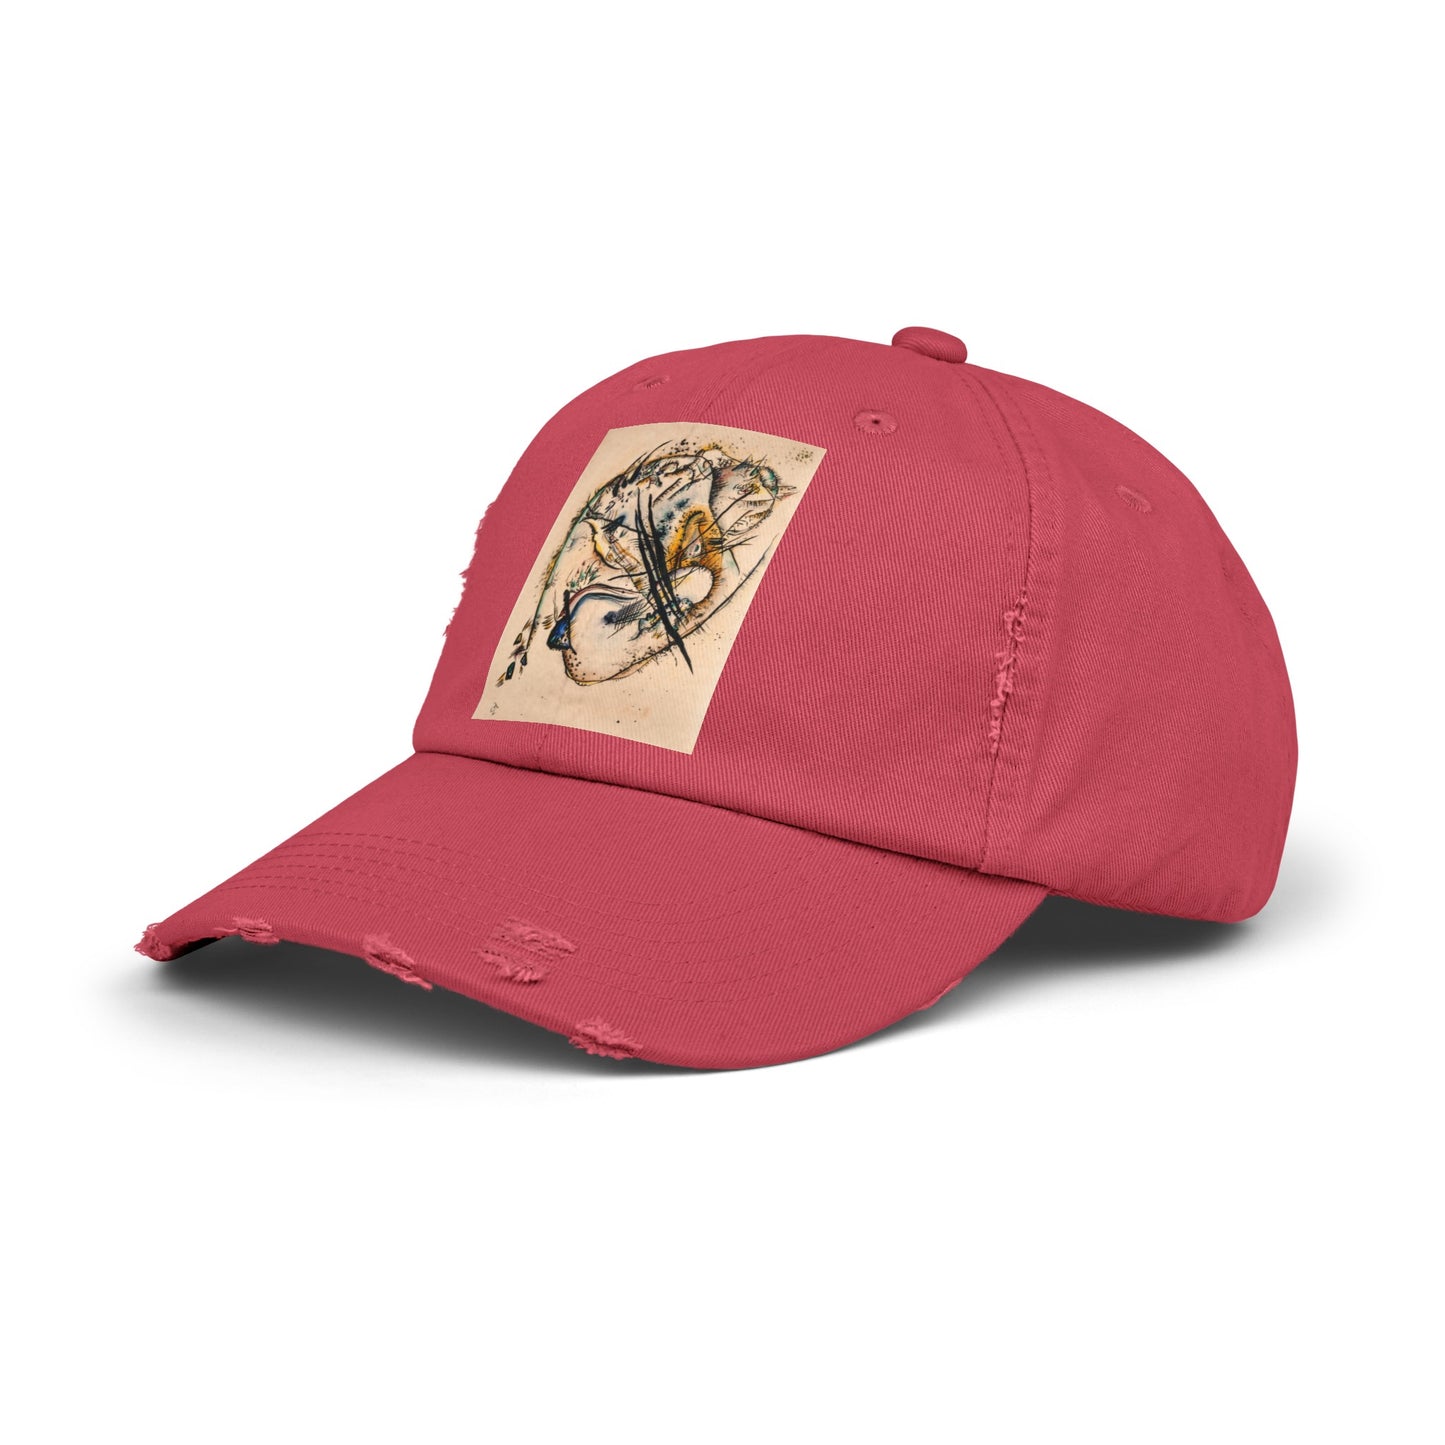 a red hat with a picture of a bird on it